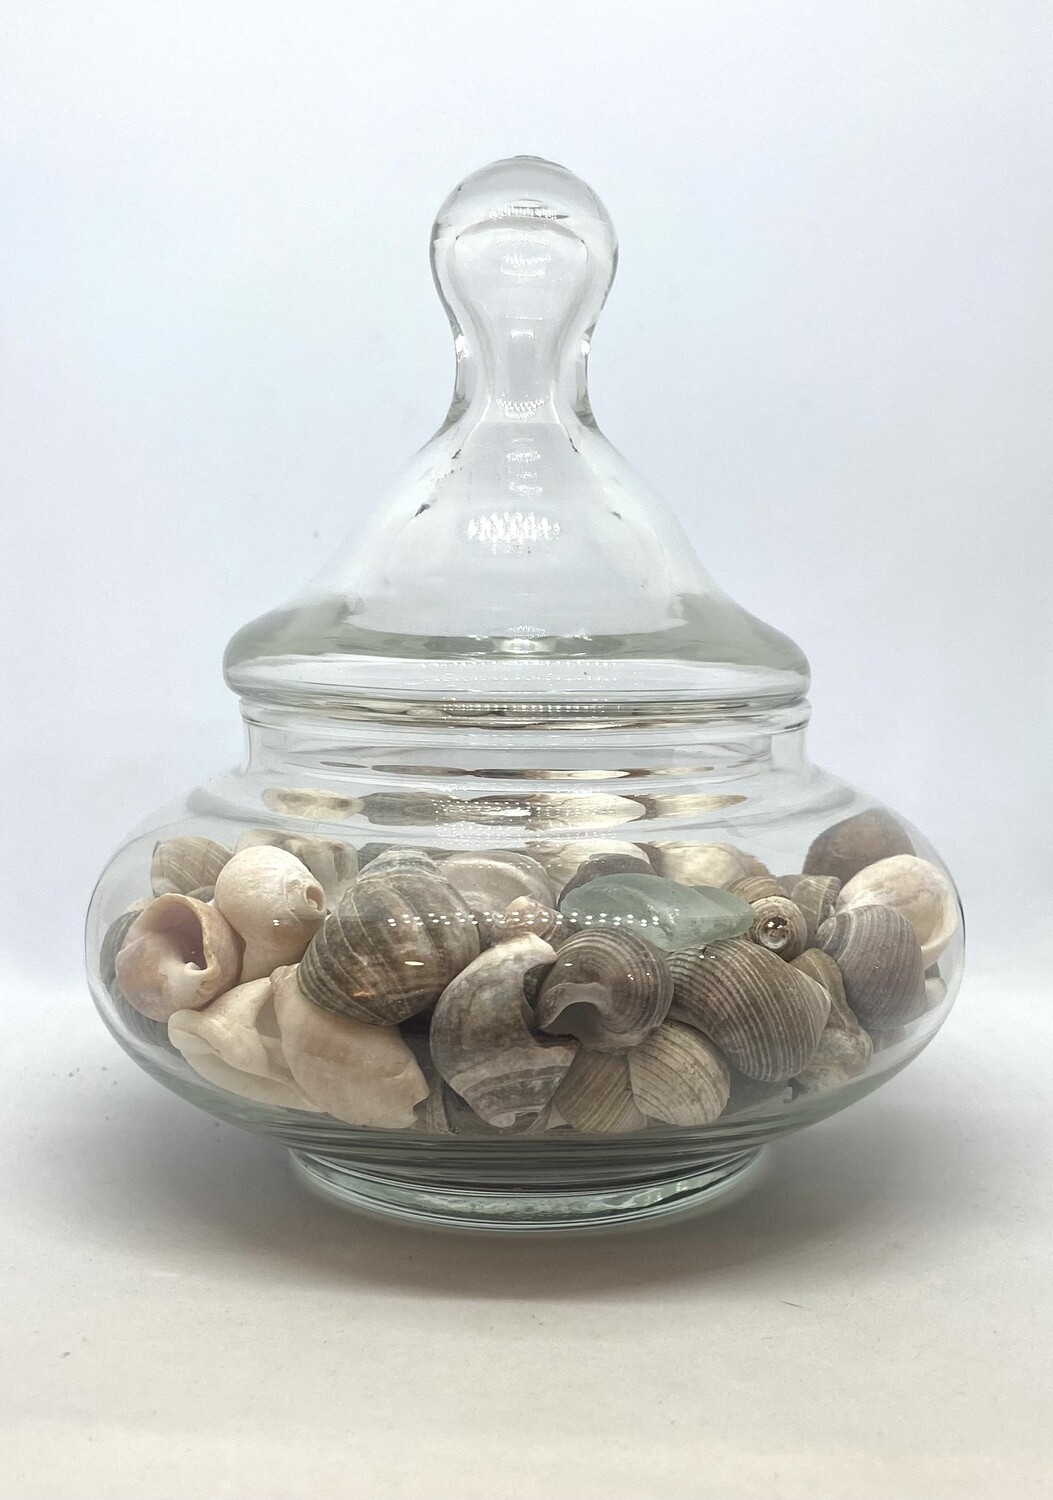 Apothecary Jar with Sea Shells